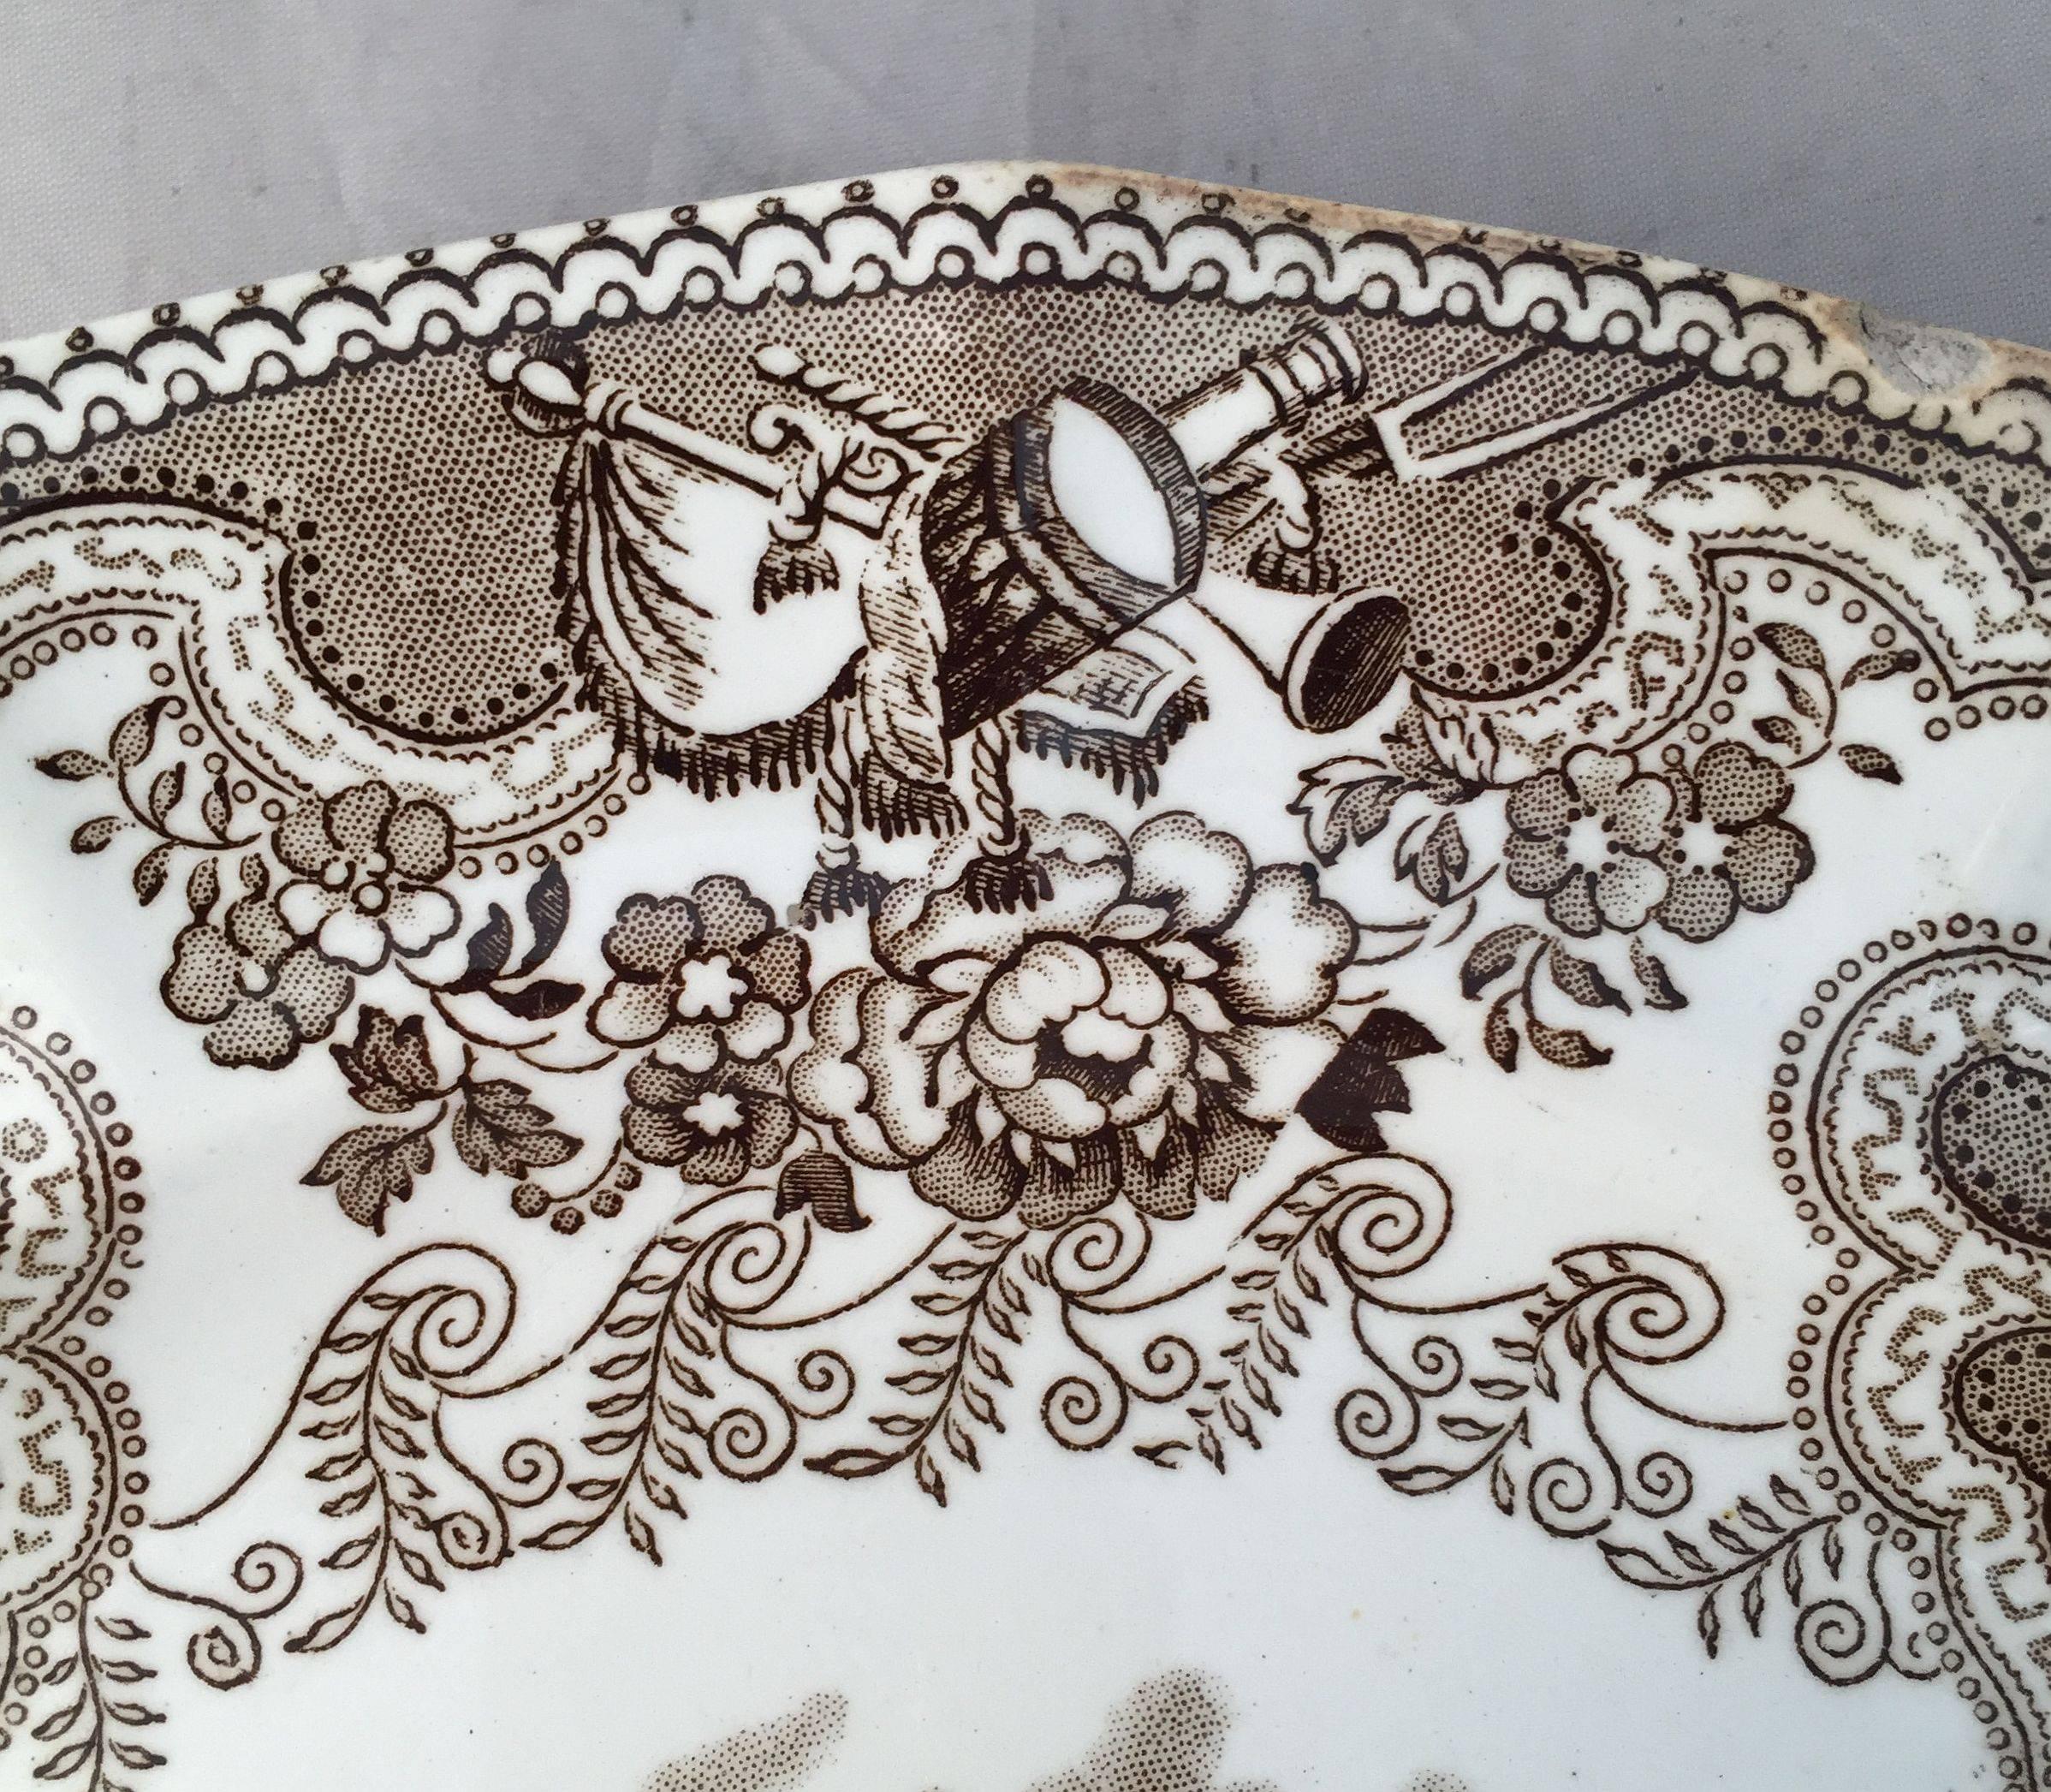 19th Century English Brown and White Plate, 'Texian Campaigne' by Thomas Walker